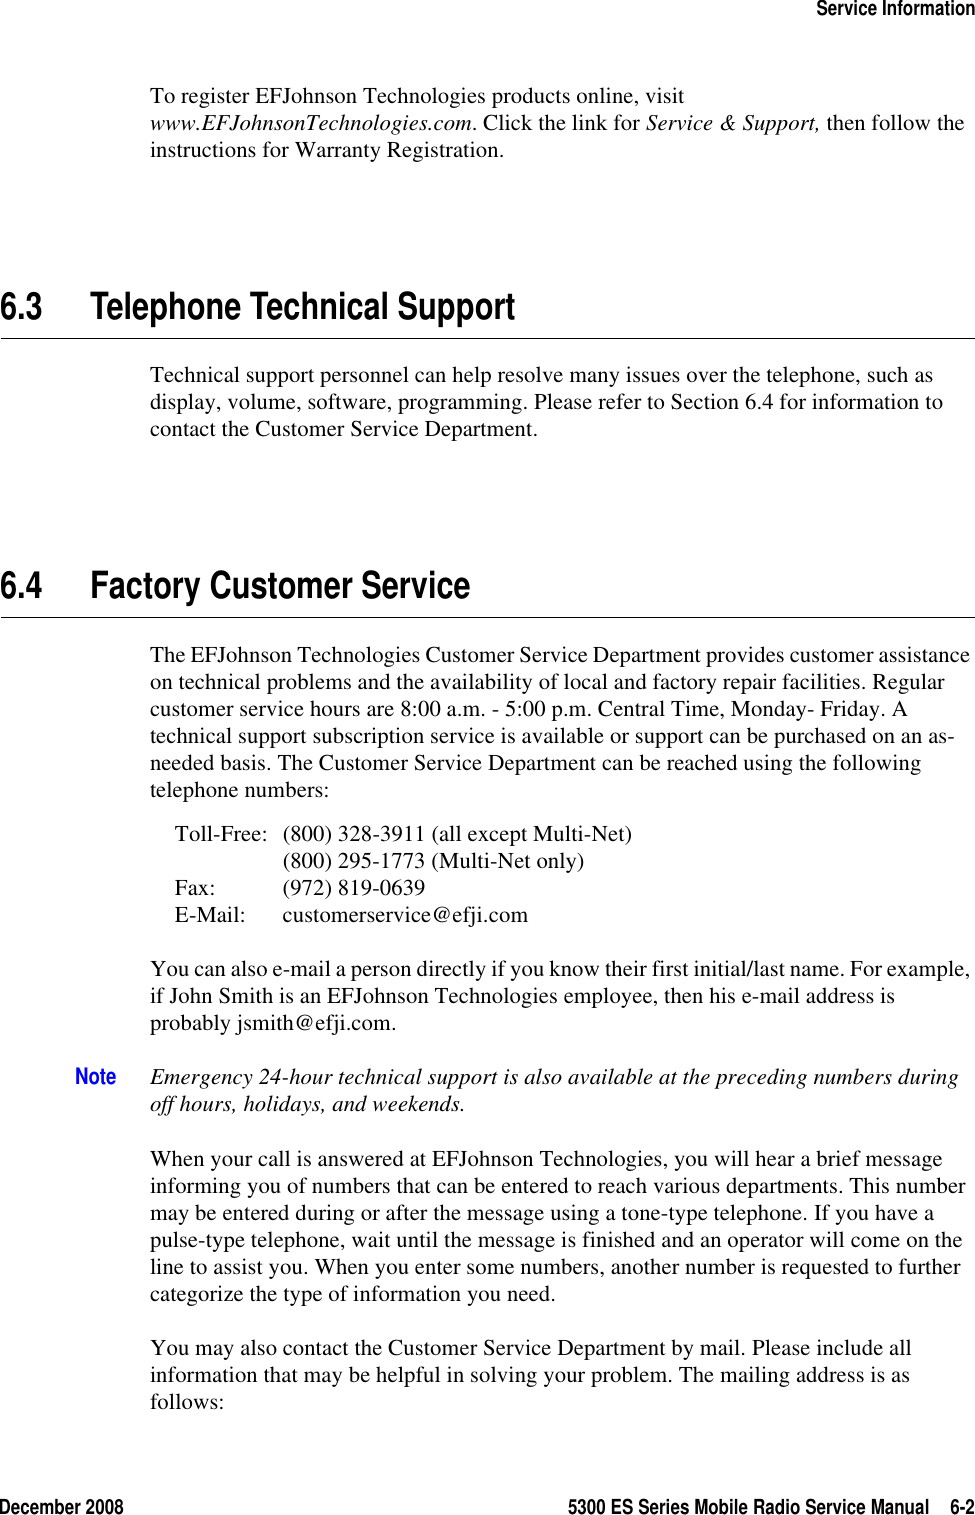 December 2008 5300 ES Series Mobile Radio Service Manual 6-2Service InformationTo register EFJohnson Technologies products online, visit www.EFJohnsonTechnologies.com. Click the link for Service &amp; Support, then follow the instructions for Warranty Registration.6.3 Telephone Technical SupportTechnical support personnel can help resolve many issues over the telephone, such as display, volume, software, programming. Please refer to Section 6.4 for information to contact the Customer Service Department.6.4 Factory Customer ServiceThe EFJohnson Technologies Customer Service Department provides customer assistance on technical problems and the availability of local and factory repair facilities. Regular customer service hours are 8:00 a.m. - 5:00 p.m. Central Time, Monday- Friday. A technical support subscription service is available or support can be purchased on an as-needed basis. The Customer Service Department can be reached using the following telephone numbers:Toll-Free: (800) 328-3911 (all except Multi-Net)(800) 295-1773 (Multi-Net only)Fax: (972) 819-0639E-Mail: customerservice@efji.comYou can also e-mail a person directly if you know their first initial/last name. For example, if John Smith is an EFJohnson Technologies employee, then his e-mail address is probably jsmith@efji.com.Note Emergency 24-hour technical support is also available at the preceding numbers during off hours, holidays, and weekends.When your call is answered at EFJohnson Technologies, you will hear a brief message informing you of numbers that can be entered to reach various departments. This number may be entered during or after the message using a tone-type telephone. If you have a pulse-type telephone, wait until the message is finished and an operator will come on the line to assist you. When you enter some numbers, another number is requested to further categorize the type of information you need.You may also contact the Customer Service Department by mail. Please include all information that may be helpful in solving your problem. The mailing address is as follows: